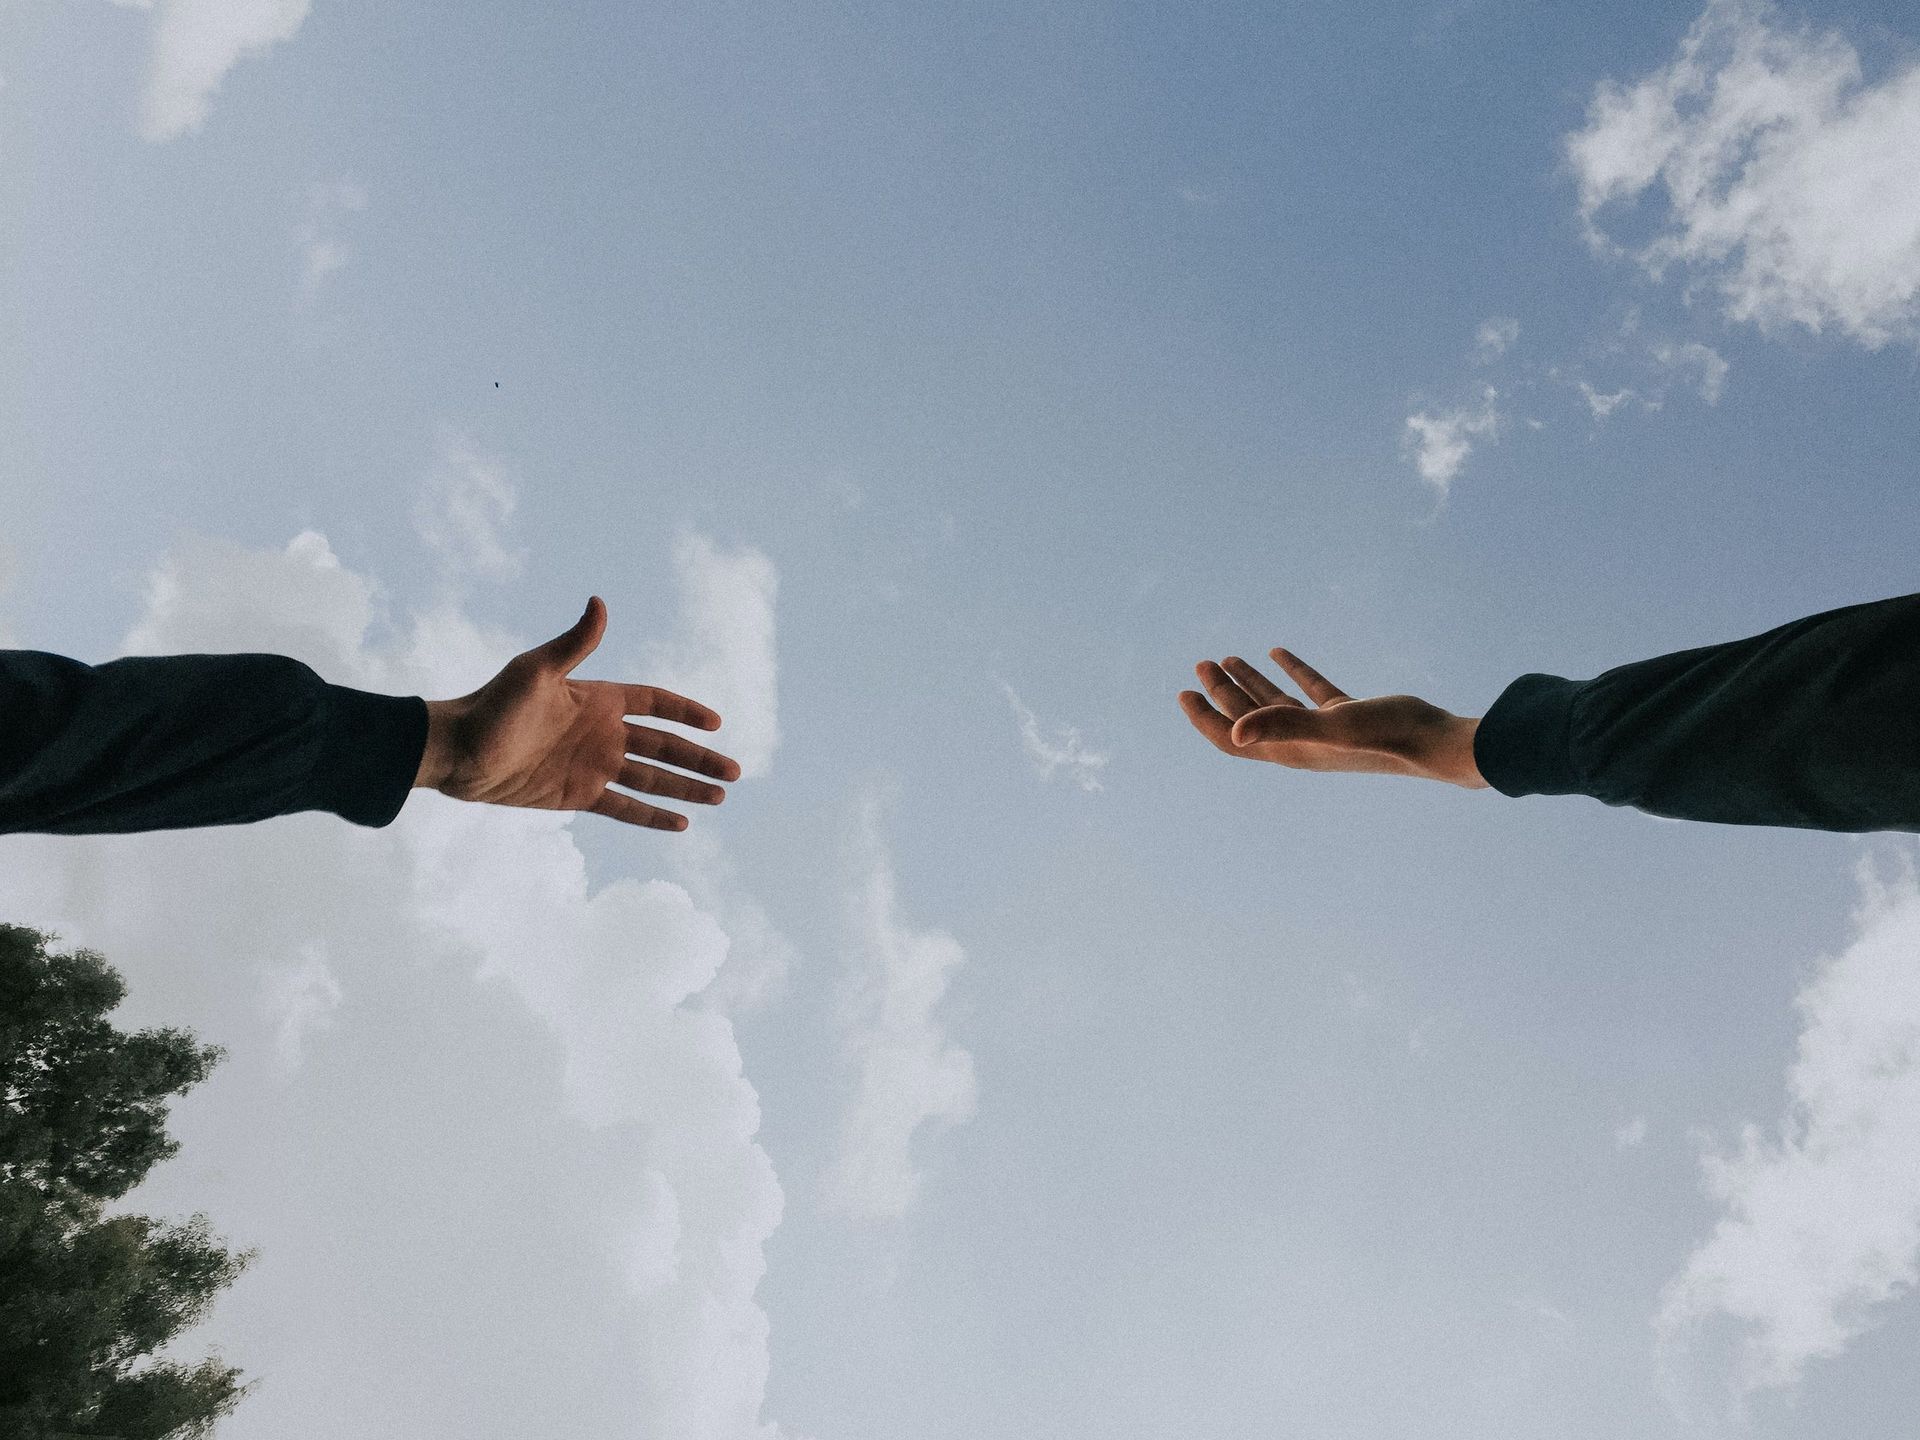 two hands reaching out towards each other against a cloudy sky